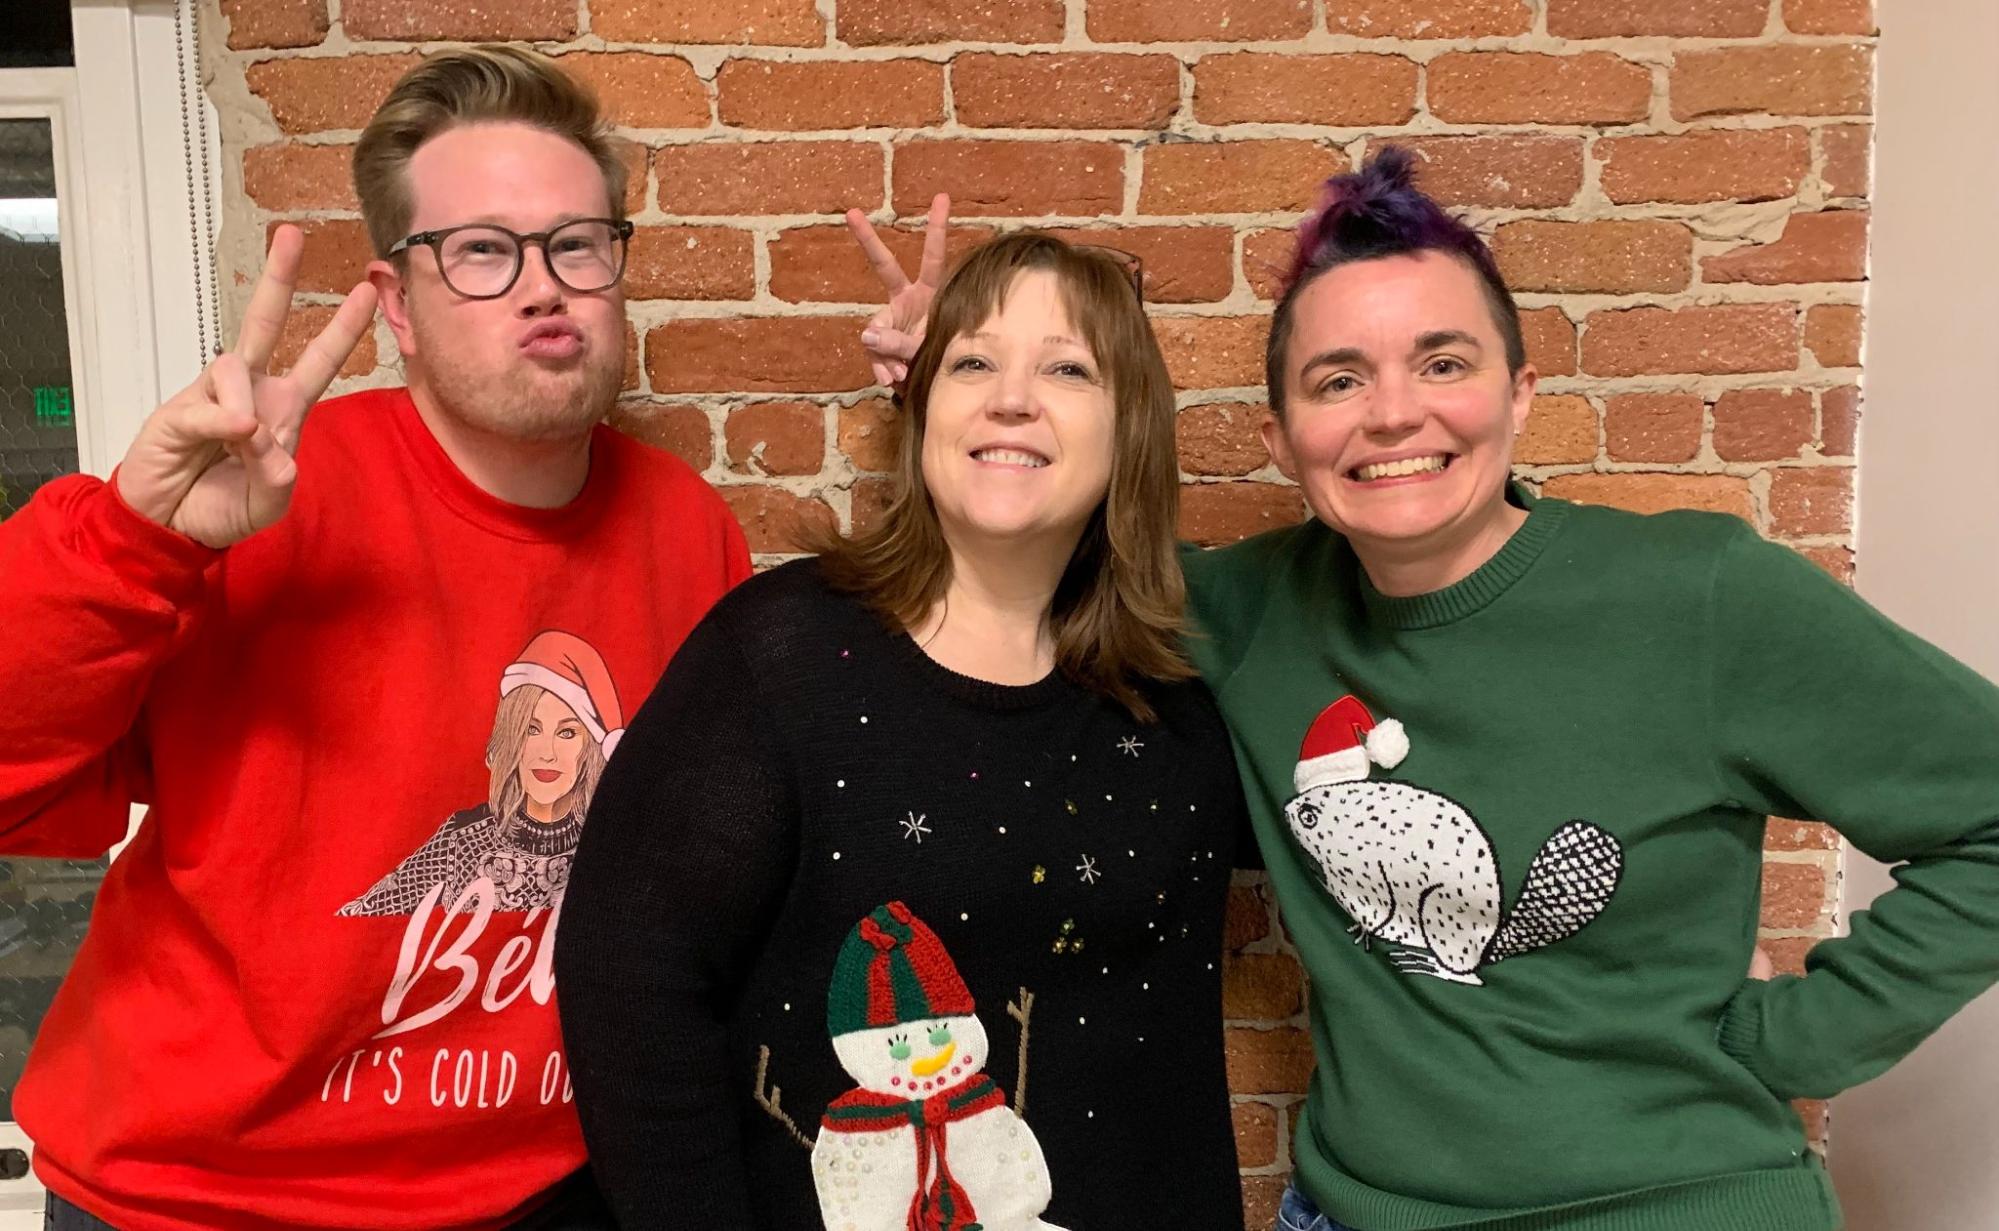 Harrison Calato, Jo Ann Sanders, and Jessica Kerr show off their ugliest Christmas sweaters at the Honeycomb office.